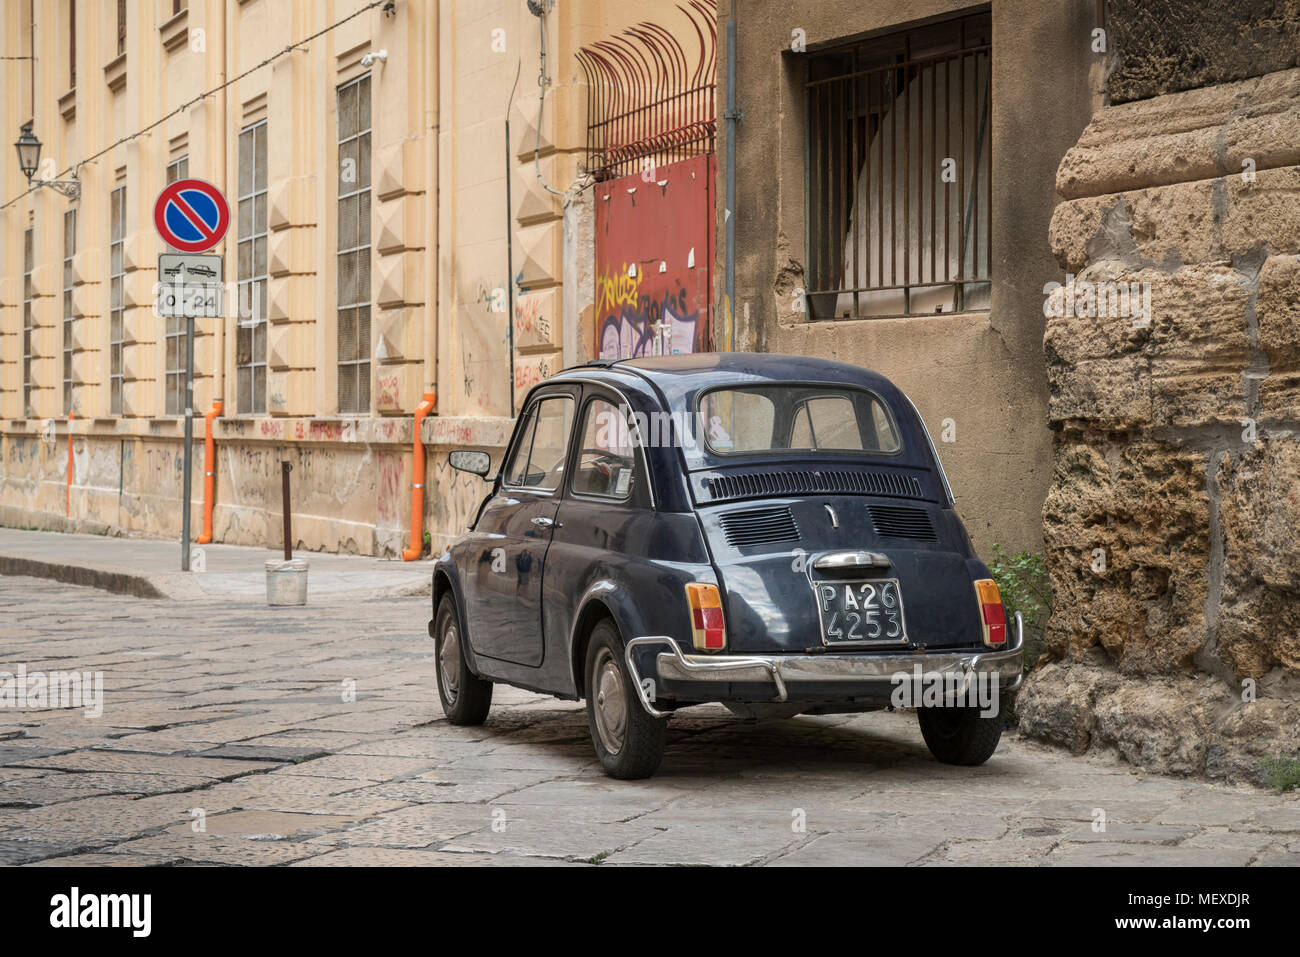 An original old blue Fiat 500 car parked in a back street of Palermo, Sicily, Italy, a 24 hour tow away zone sign in front. Stock Photo